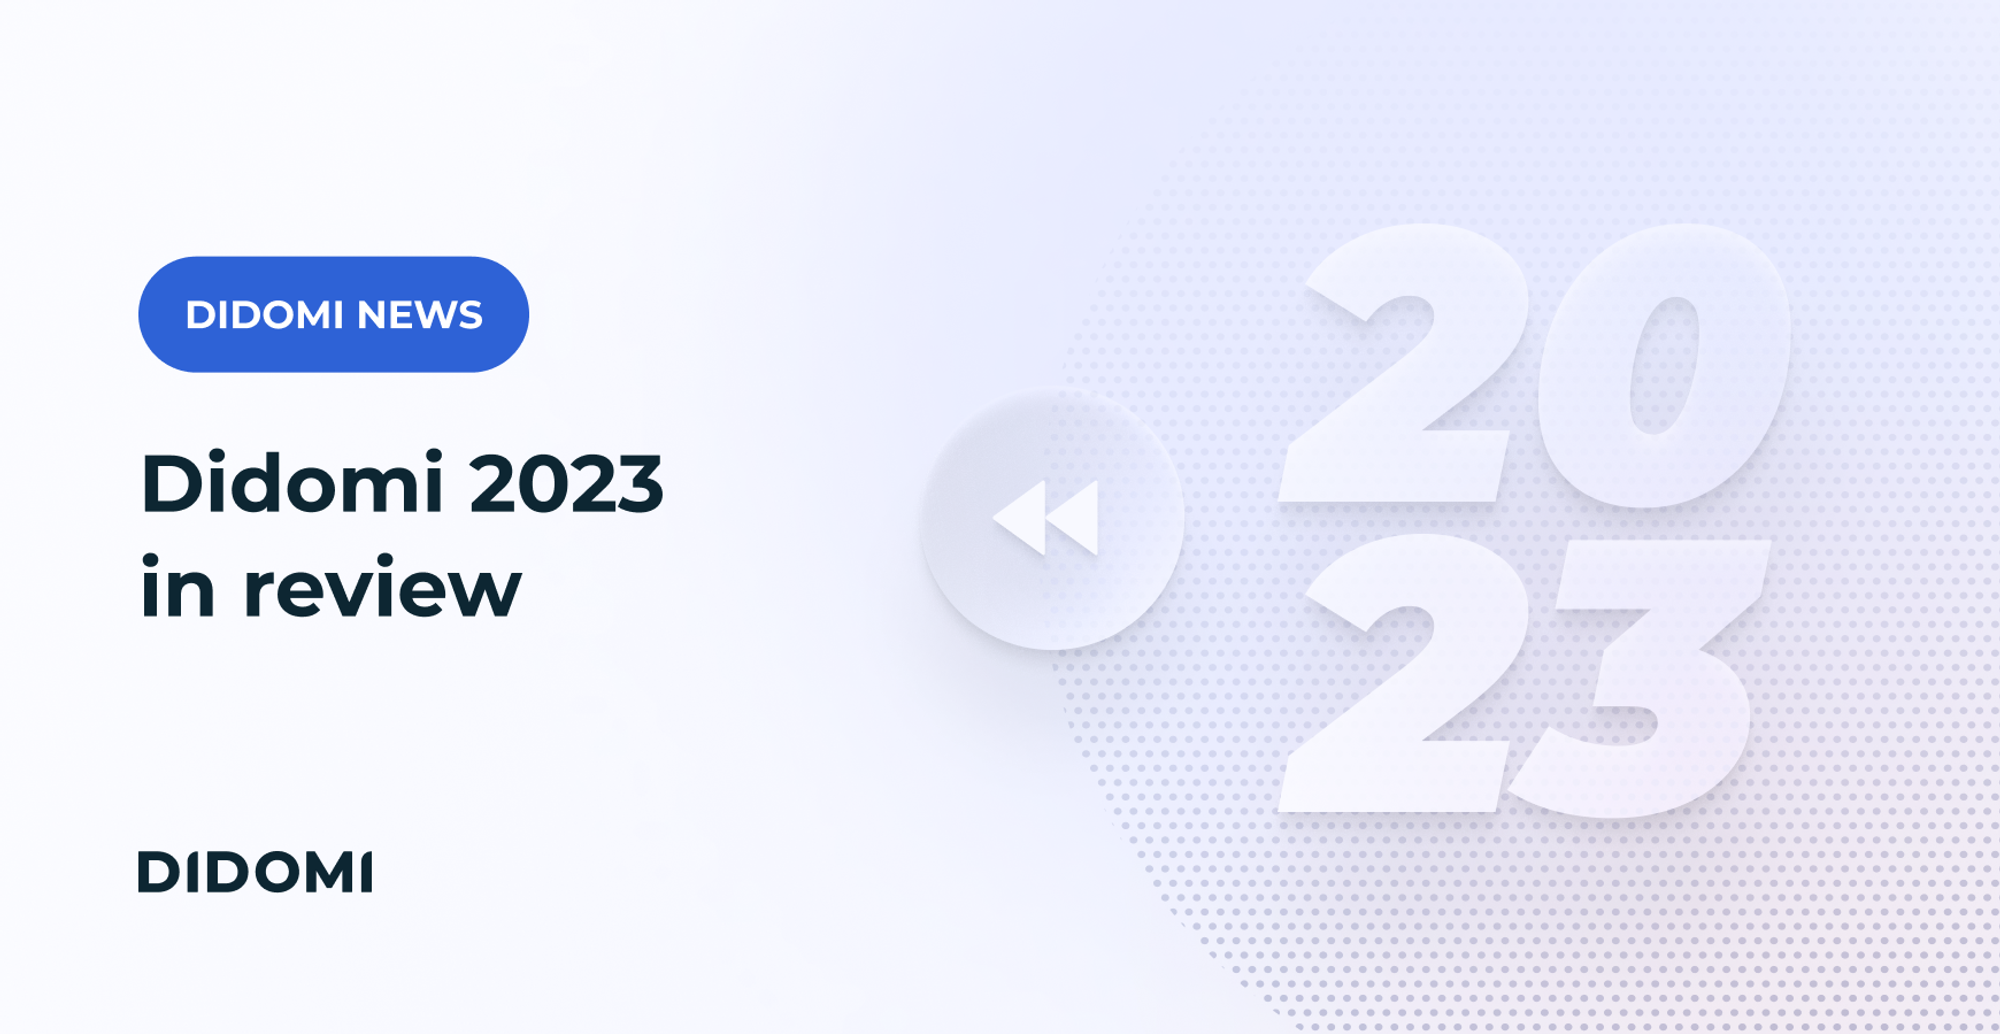 On the left side of the image, the mention "Didomi news" stands over the title "Didomi 2023 in review". On the right, a "rewind"| icon consiting of two arrows pointing left, is accompanied by large "2023" numbers fading in the background